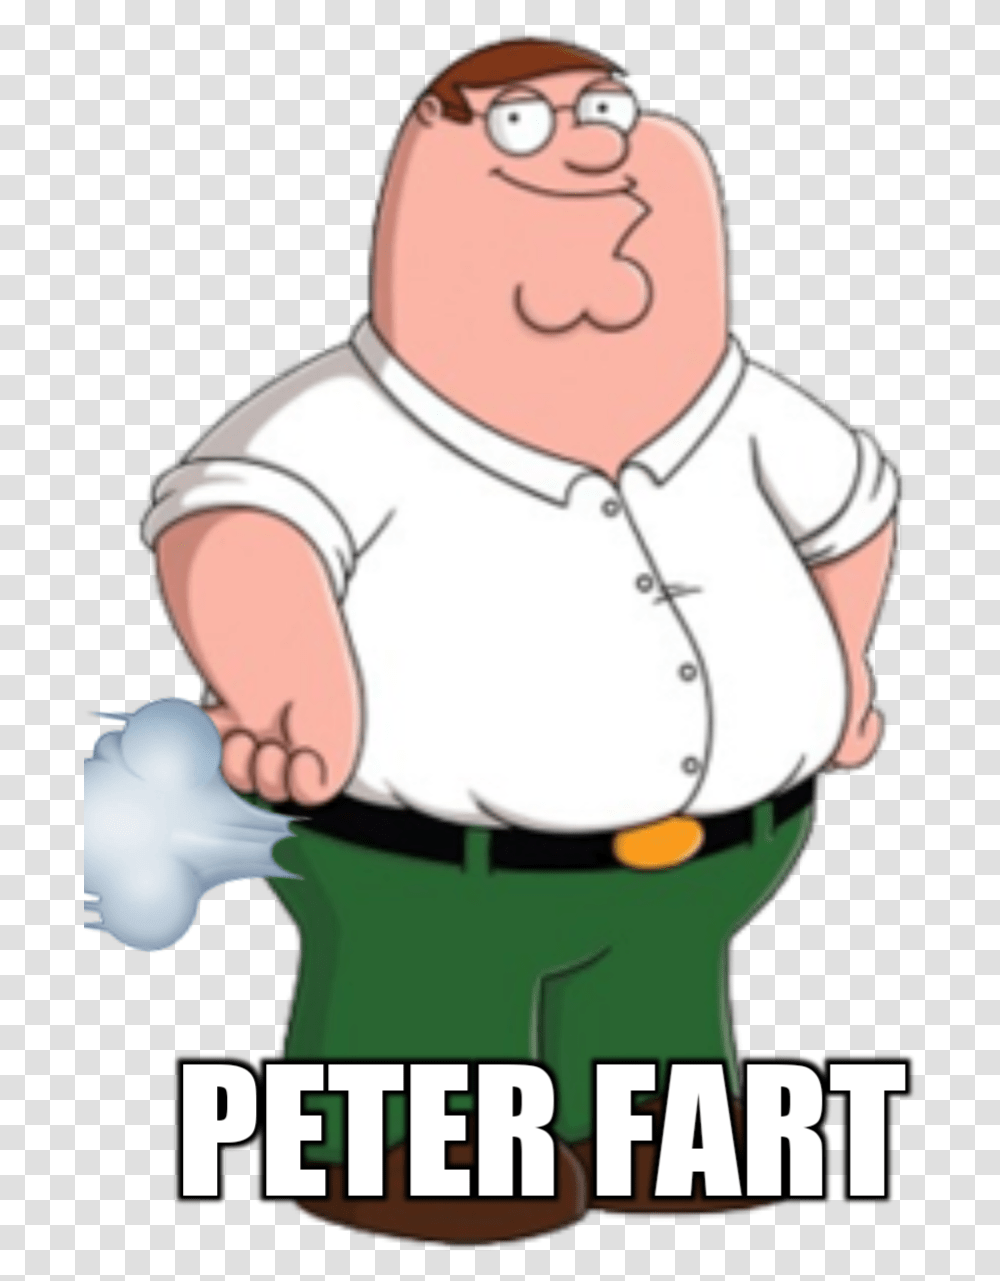 Peter Fart Peter Griffin Cartoon Clip Art Peter Griffin Family Guy, Person, Human, Chef, Snowman Transparent Png